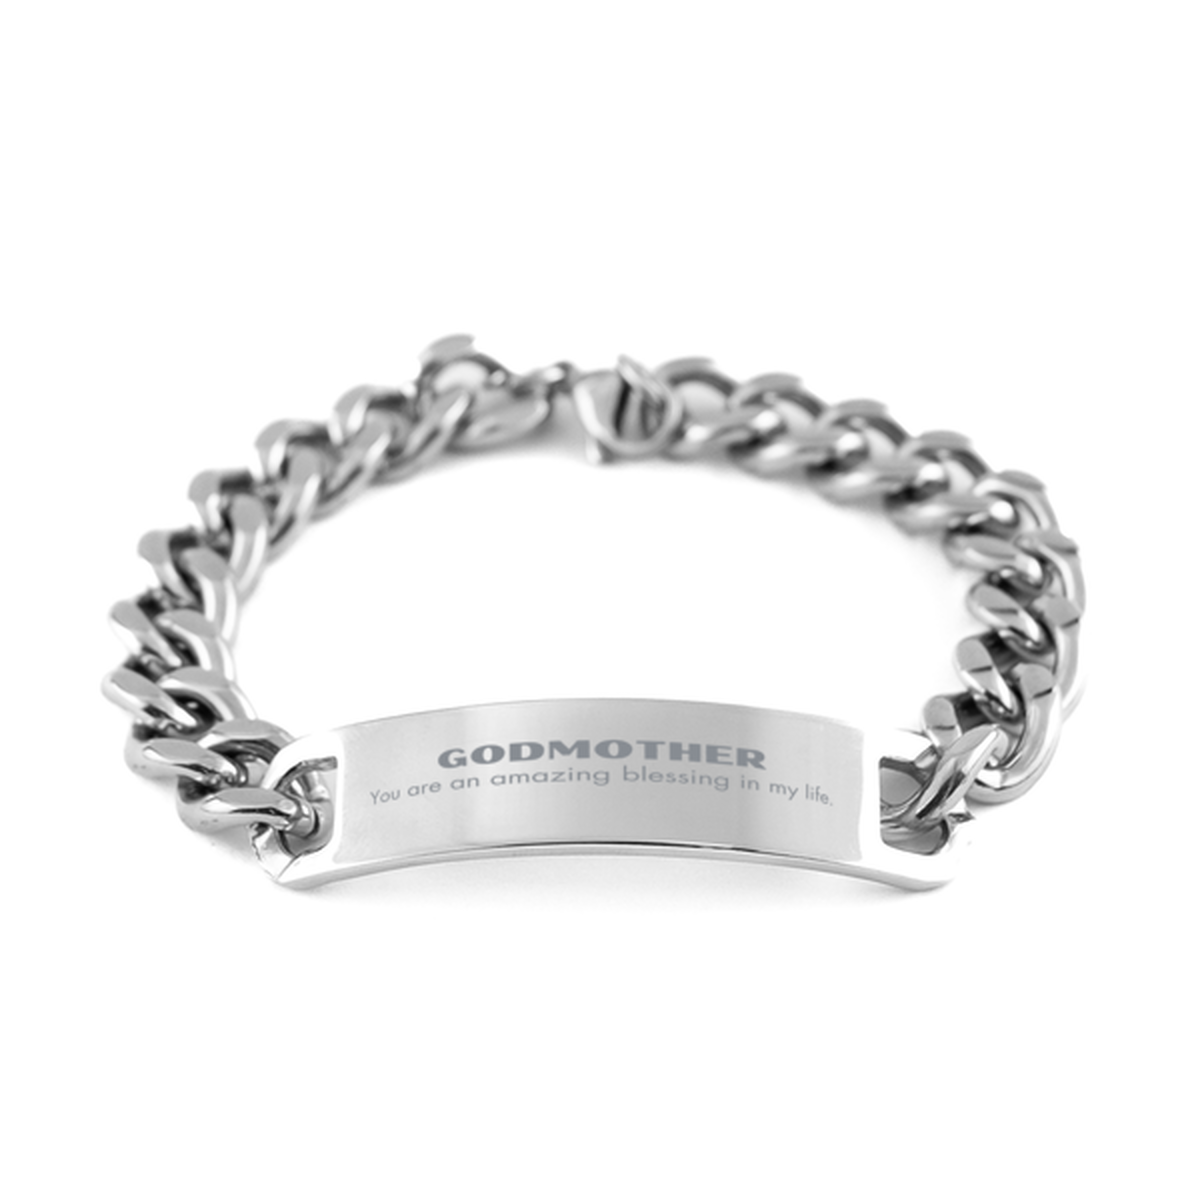 Godmother Cuban Chain Stainless Steel Bracelet, You are an amazing blessing in my life, Thank You Gifts For Godmother, Inspirational Birthday Christmas Unique Gifts For Godmother